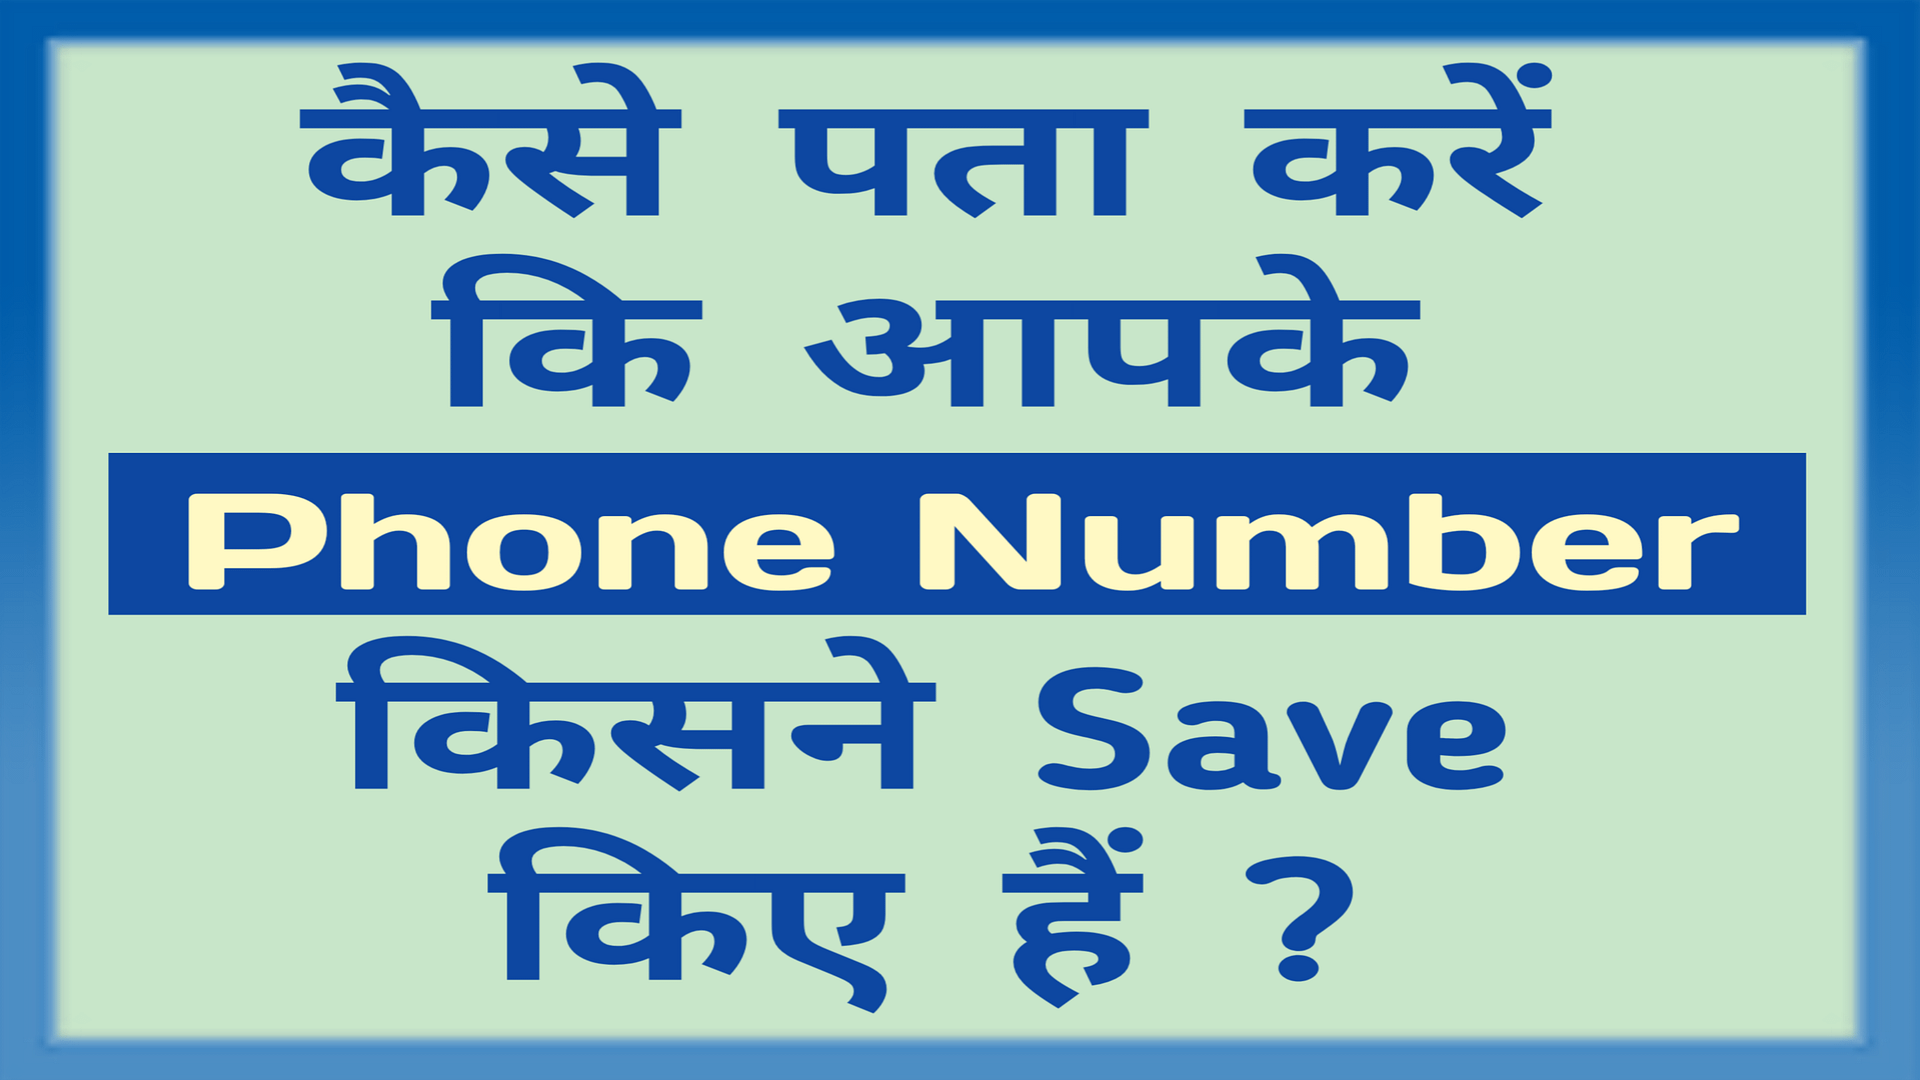 Save number